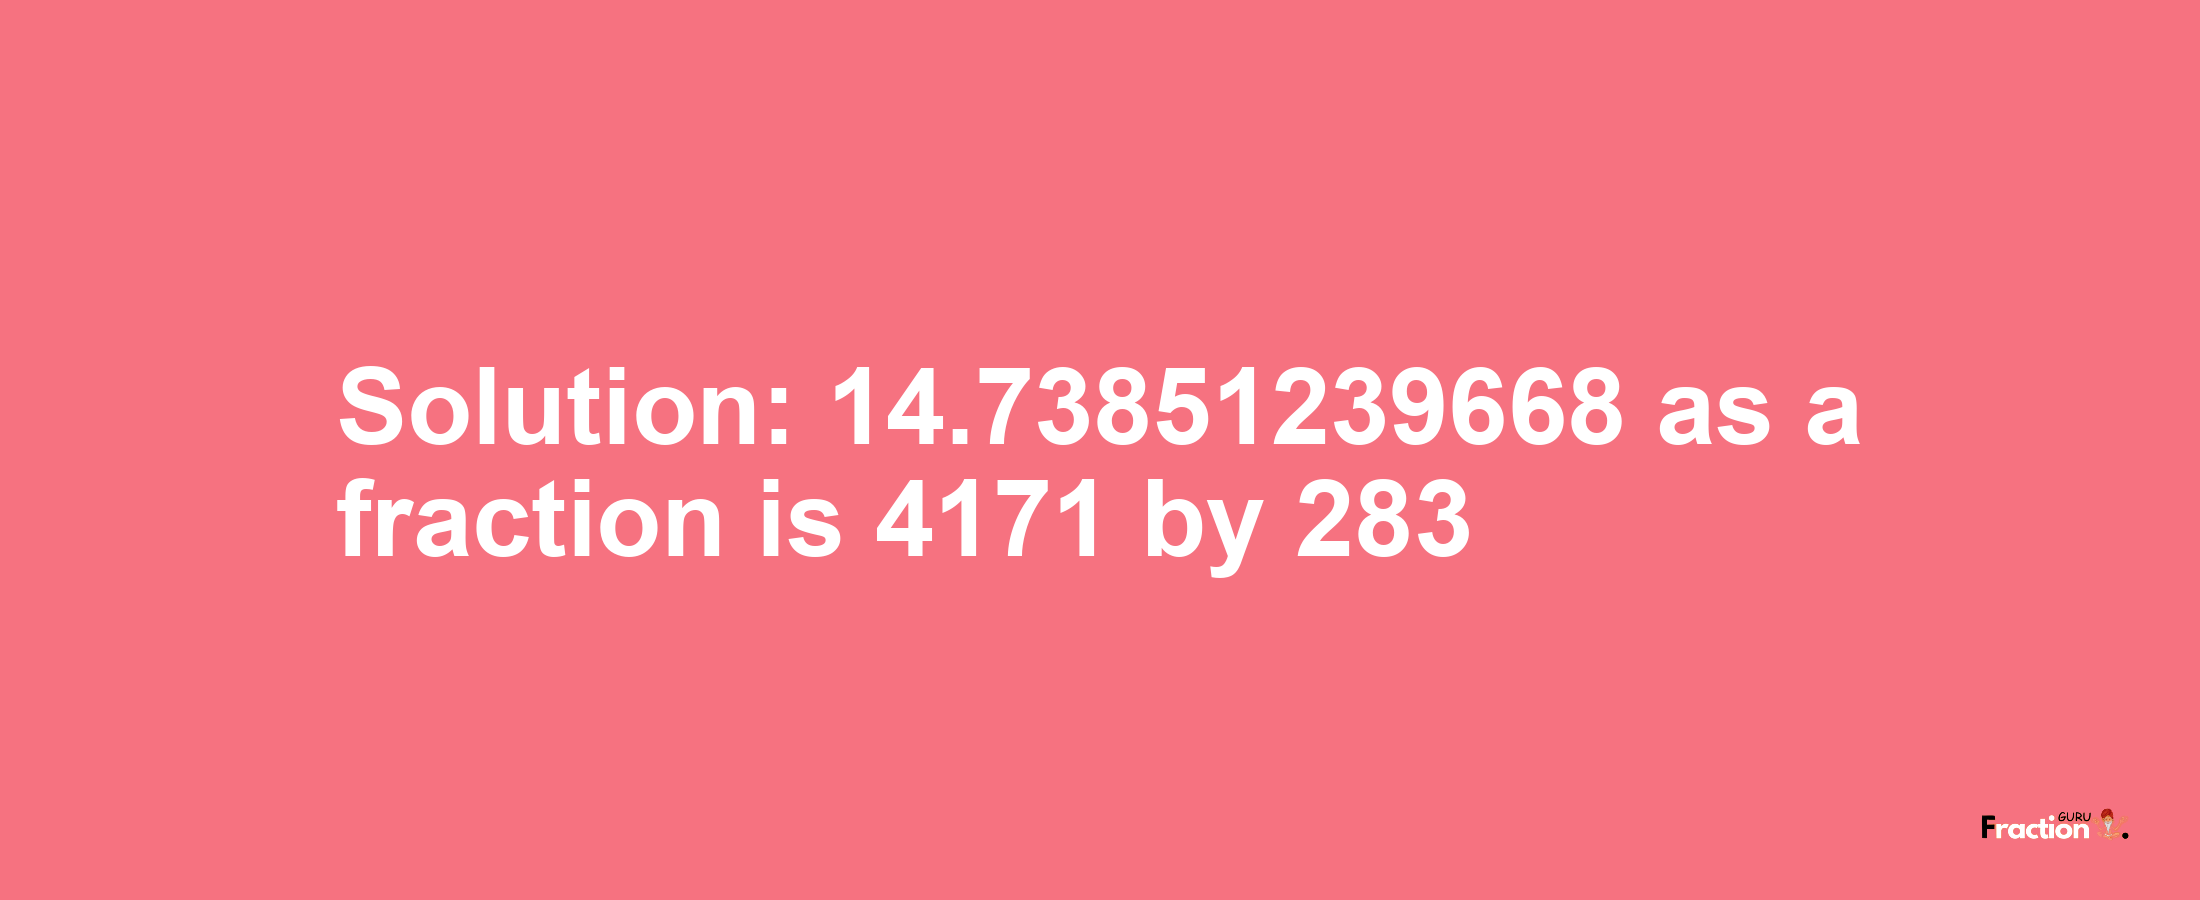 Solution:14.73851239668 as a fraction is 4171/283